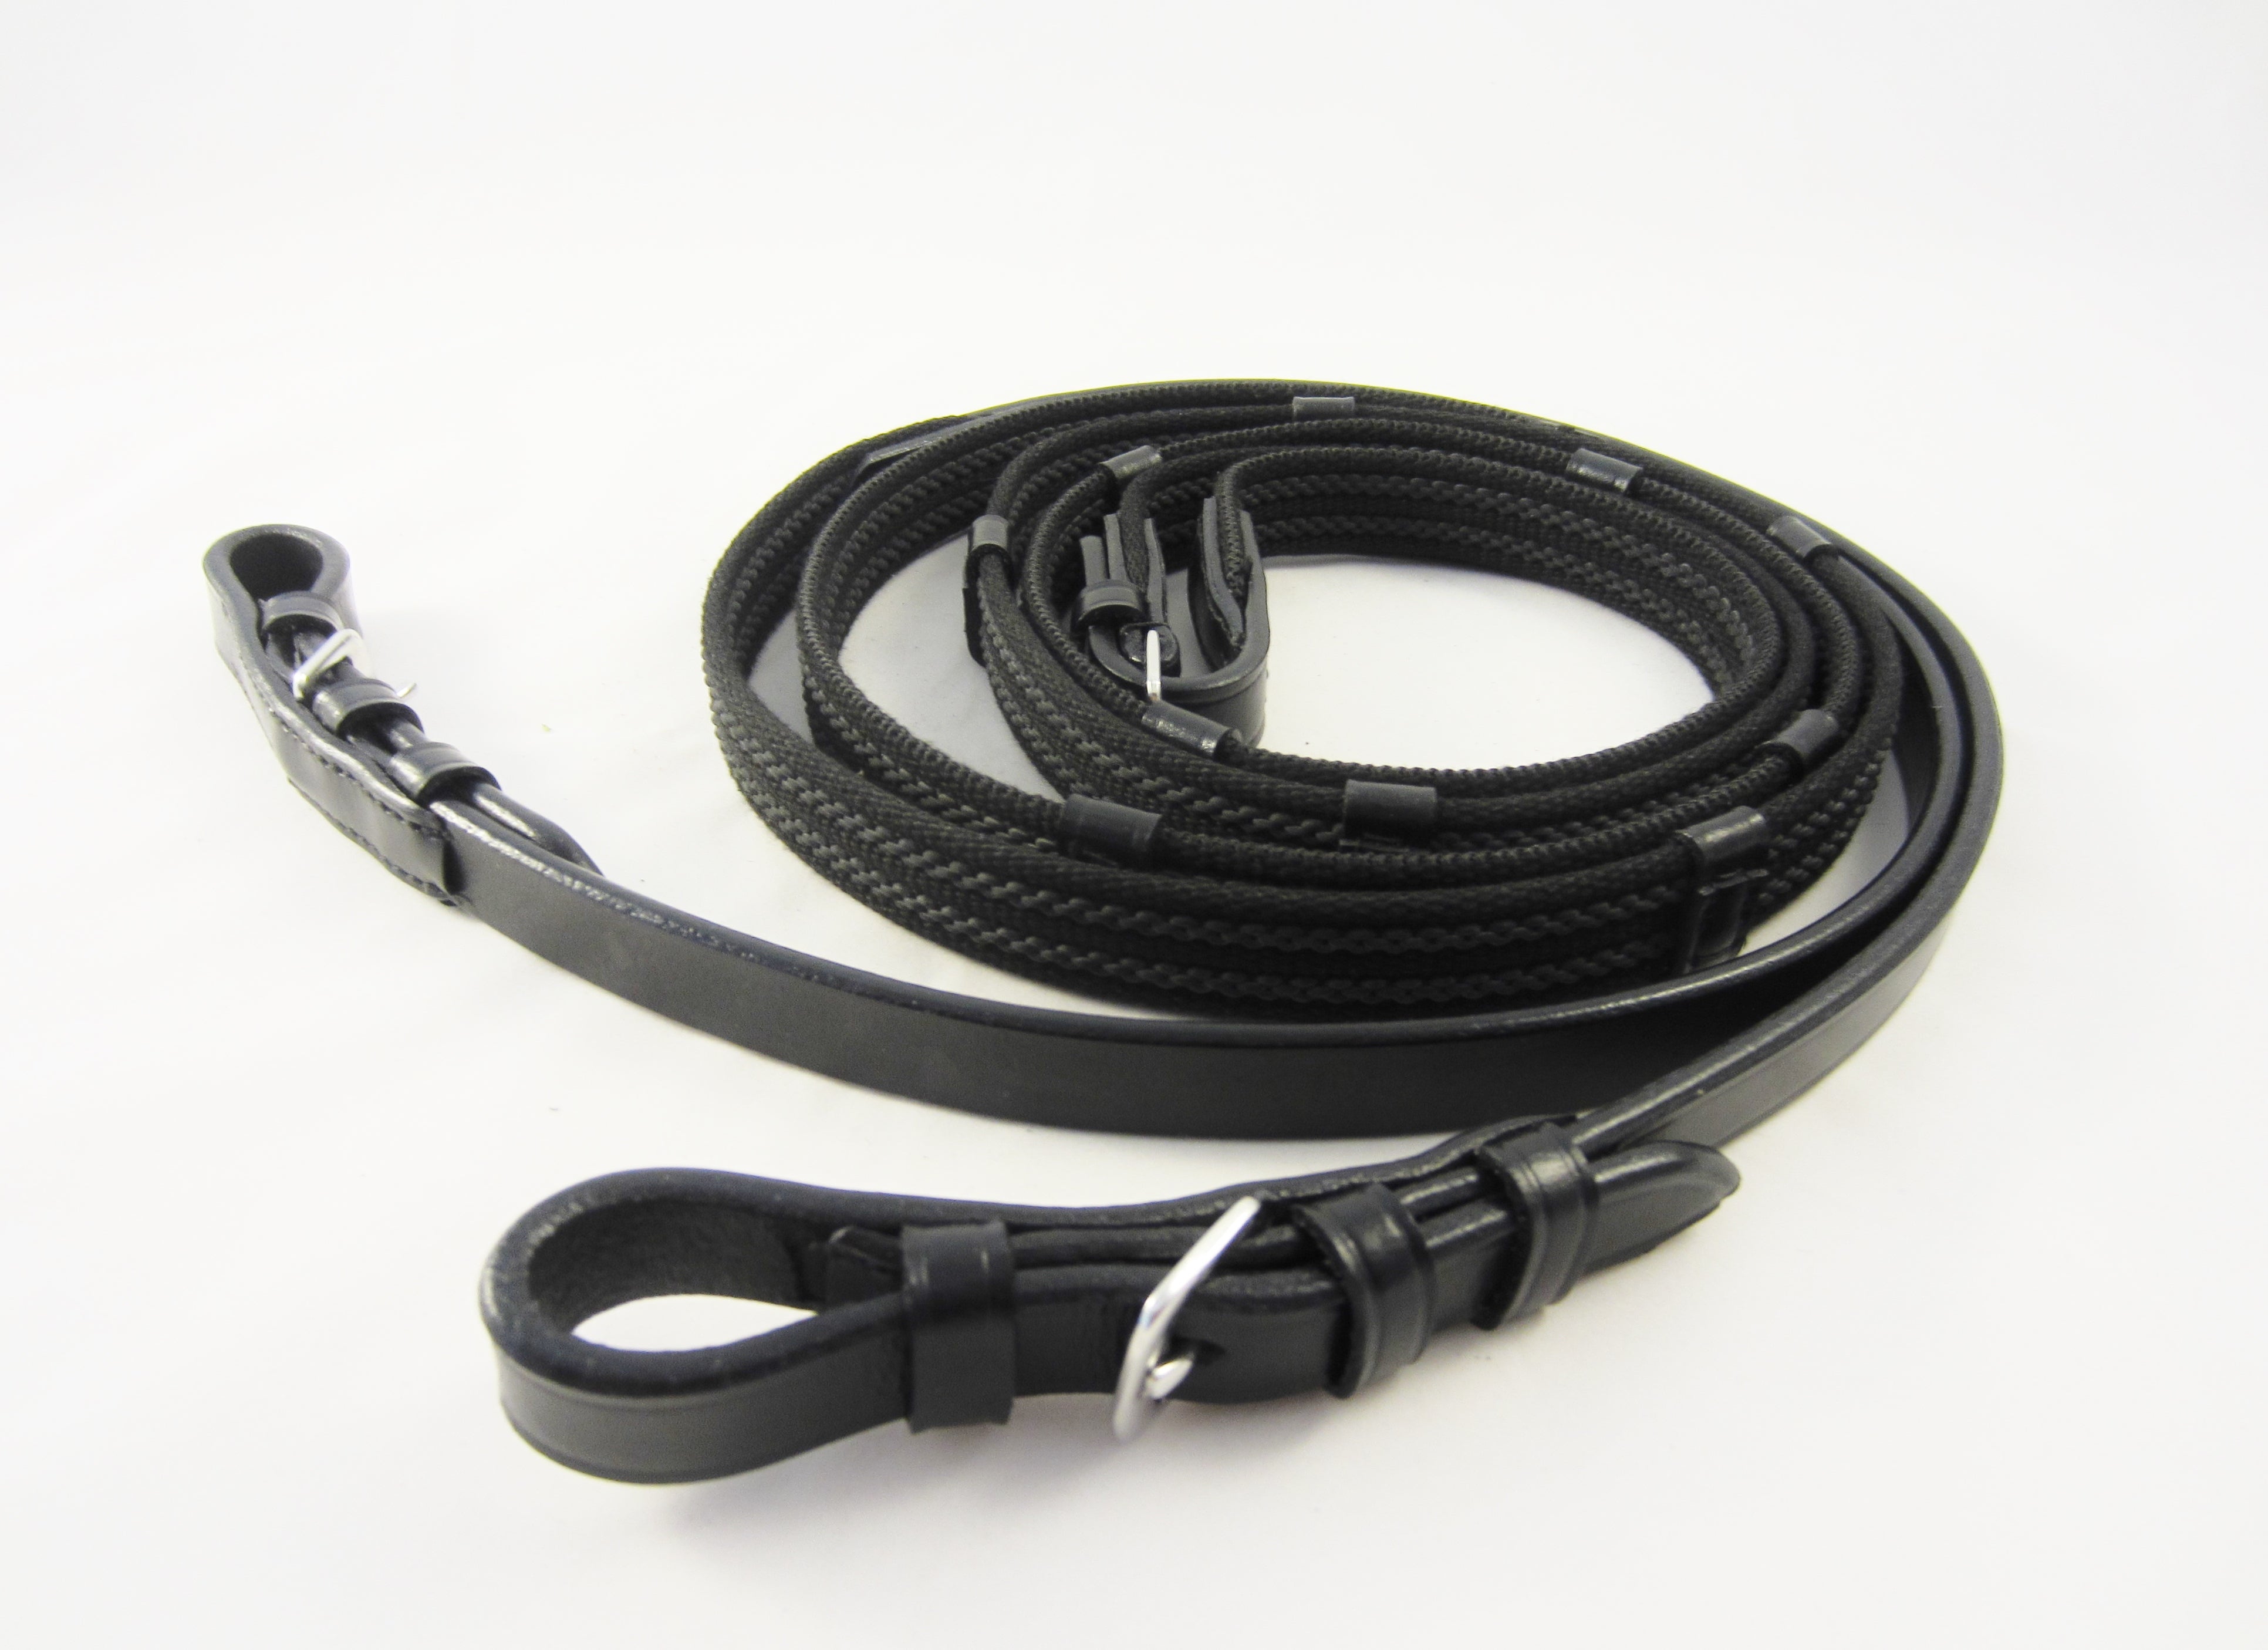 "Medium" Supergrip reins with medium buckle and leather ends